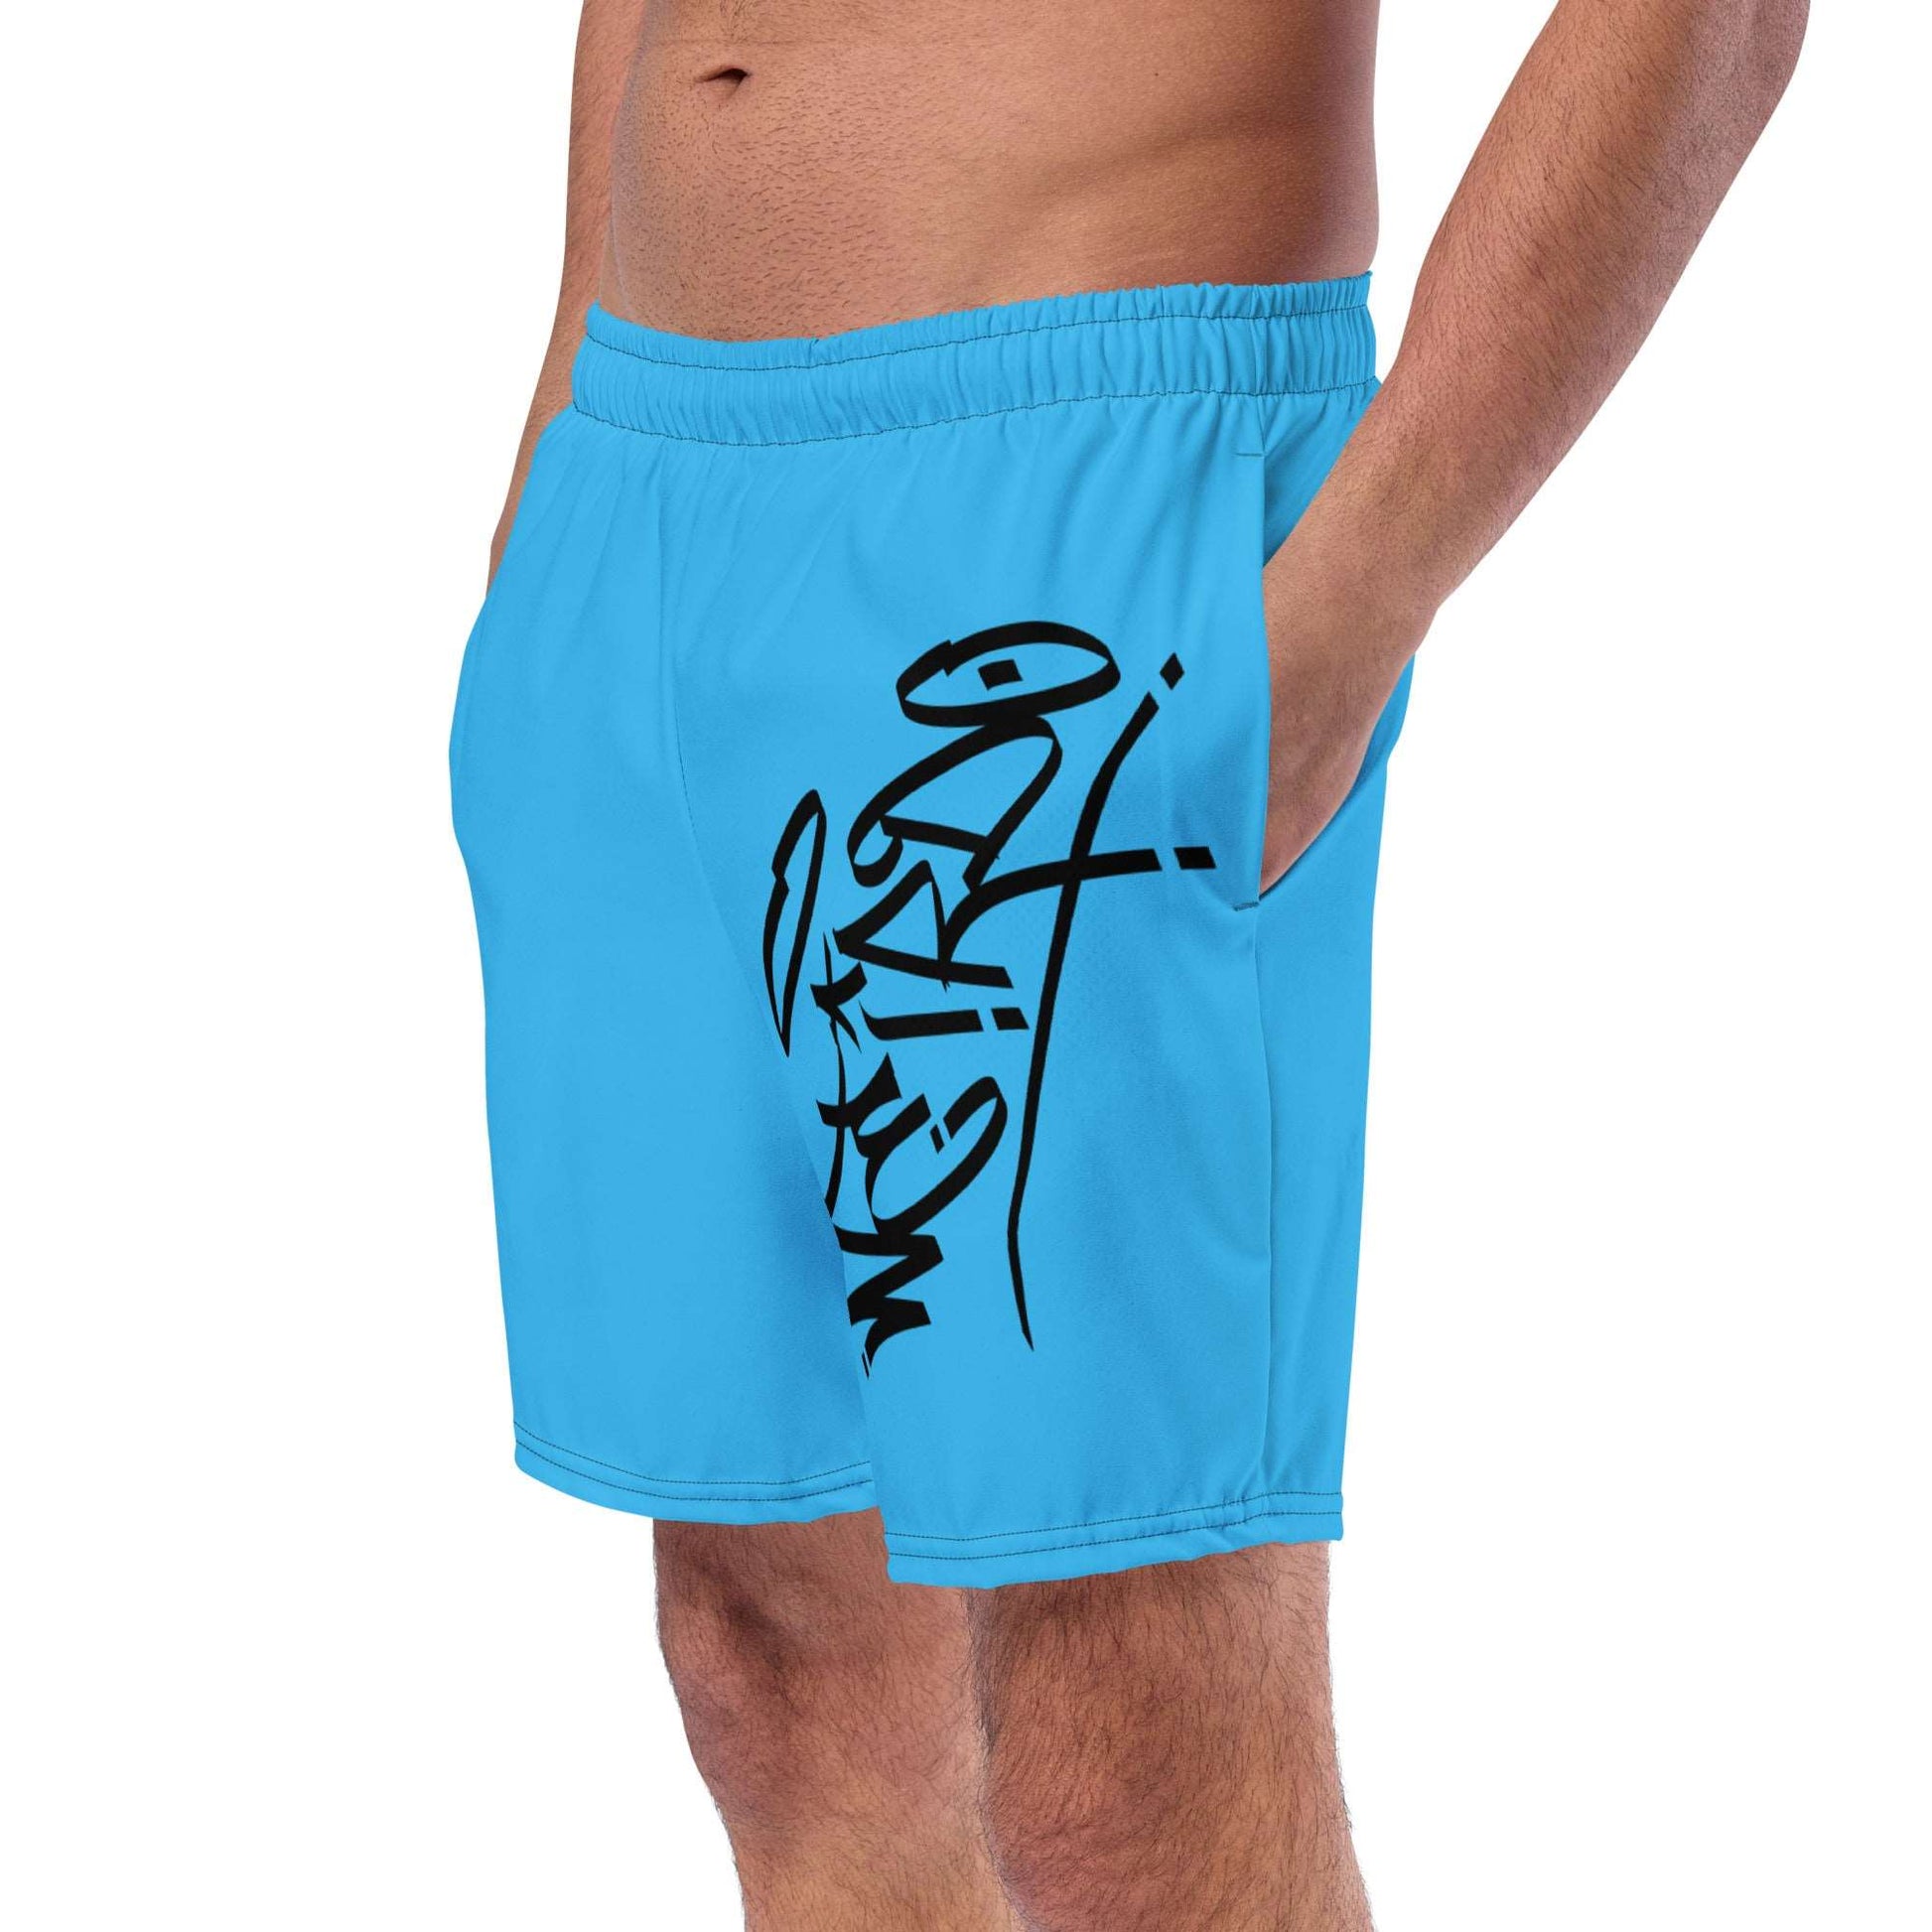 side man wearing weirdo tag swim shorts blue by B.Different Clothing independent streetwear inspired by street art graffiti